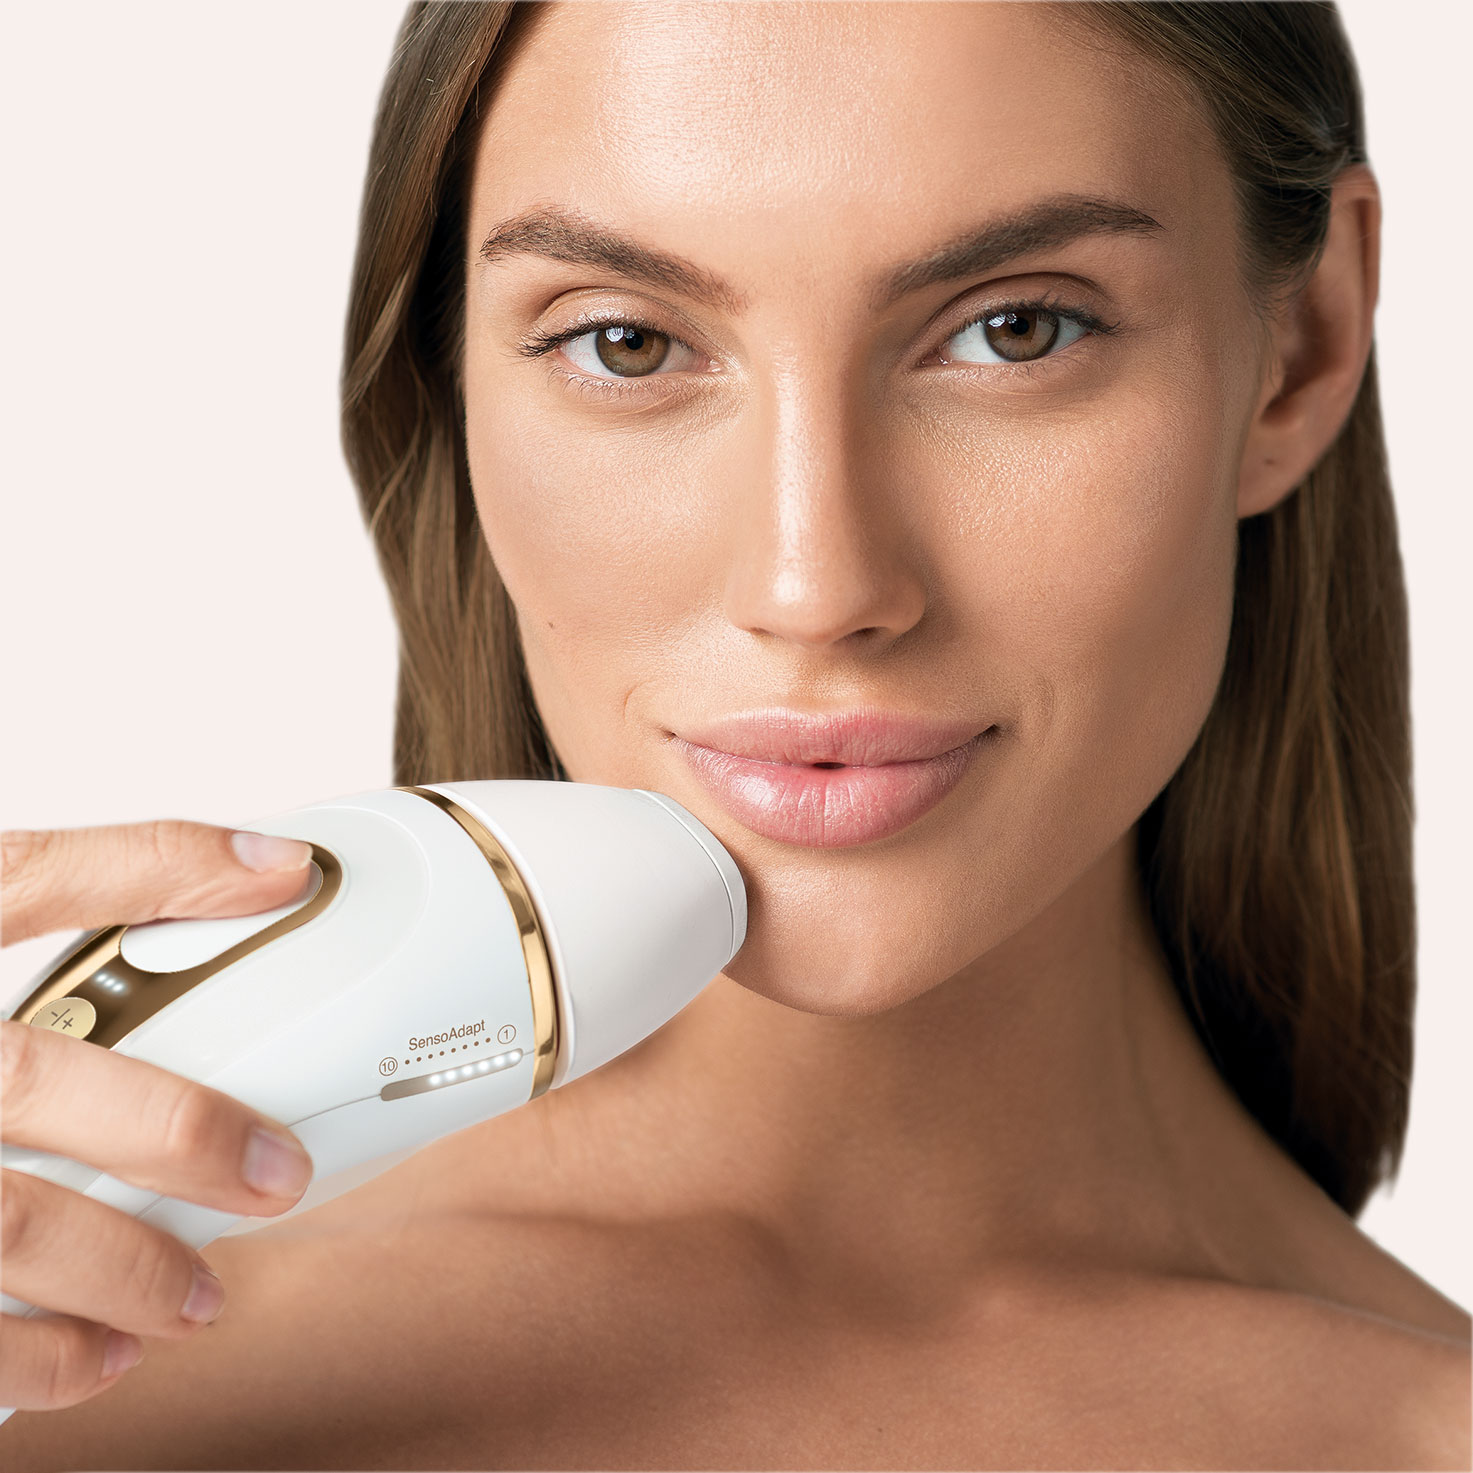 Buy Braun Silk Expert Pro 5 PL5137 Laser Hair Removal, White and Gold  Online at Best Prices in India - JioMart.